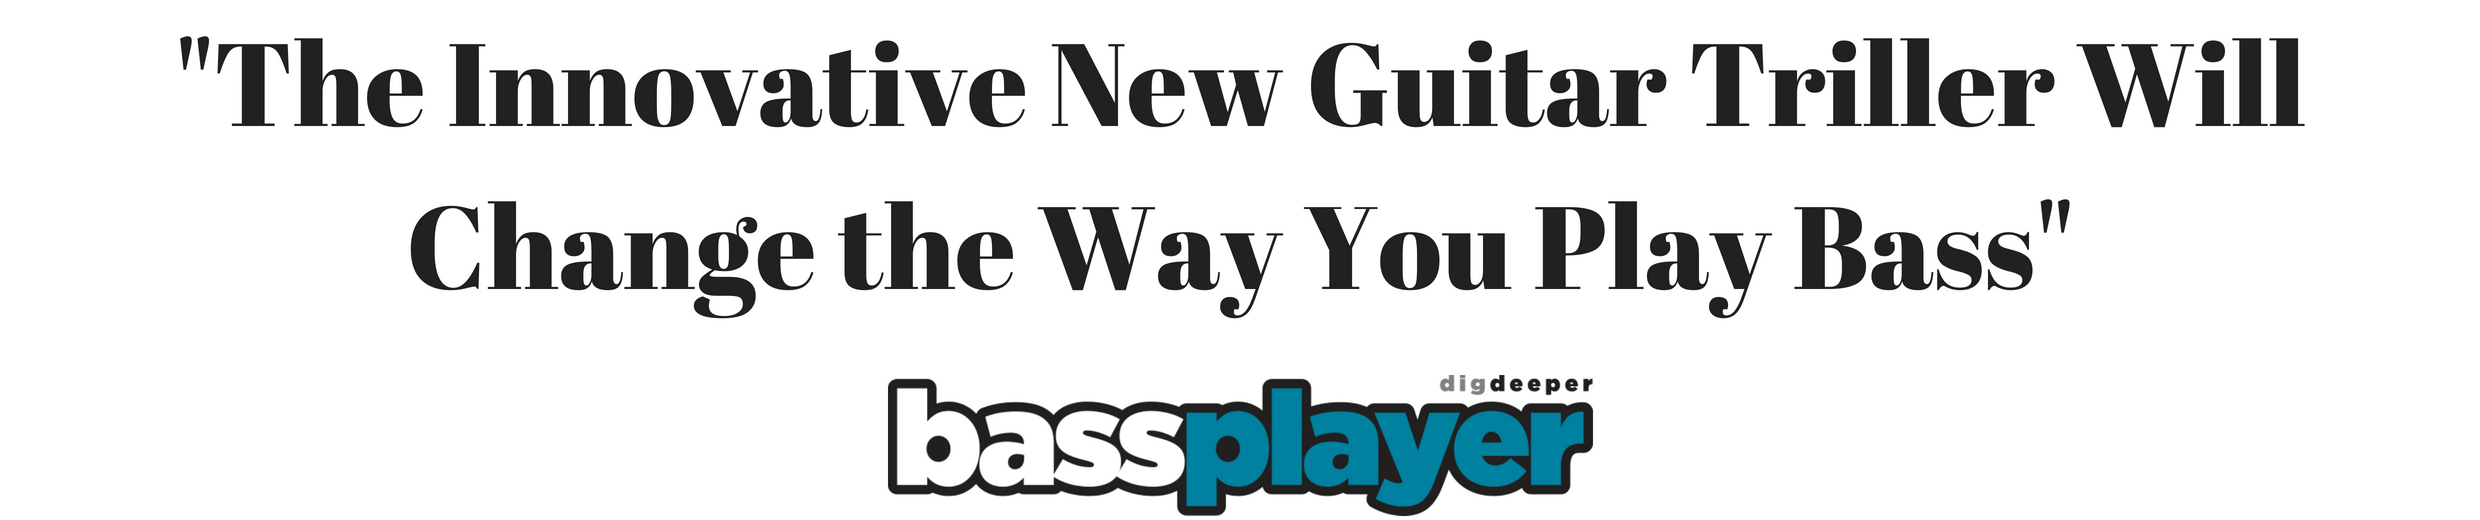 The Innovative New Guitar Triller Will Change the Way You Play Bass.jpg